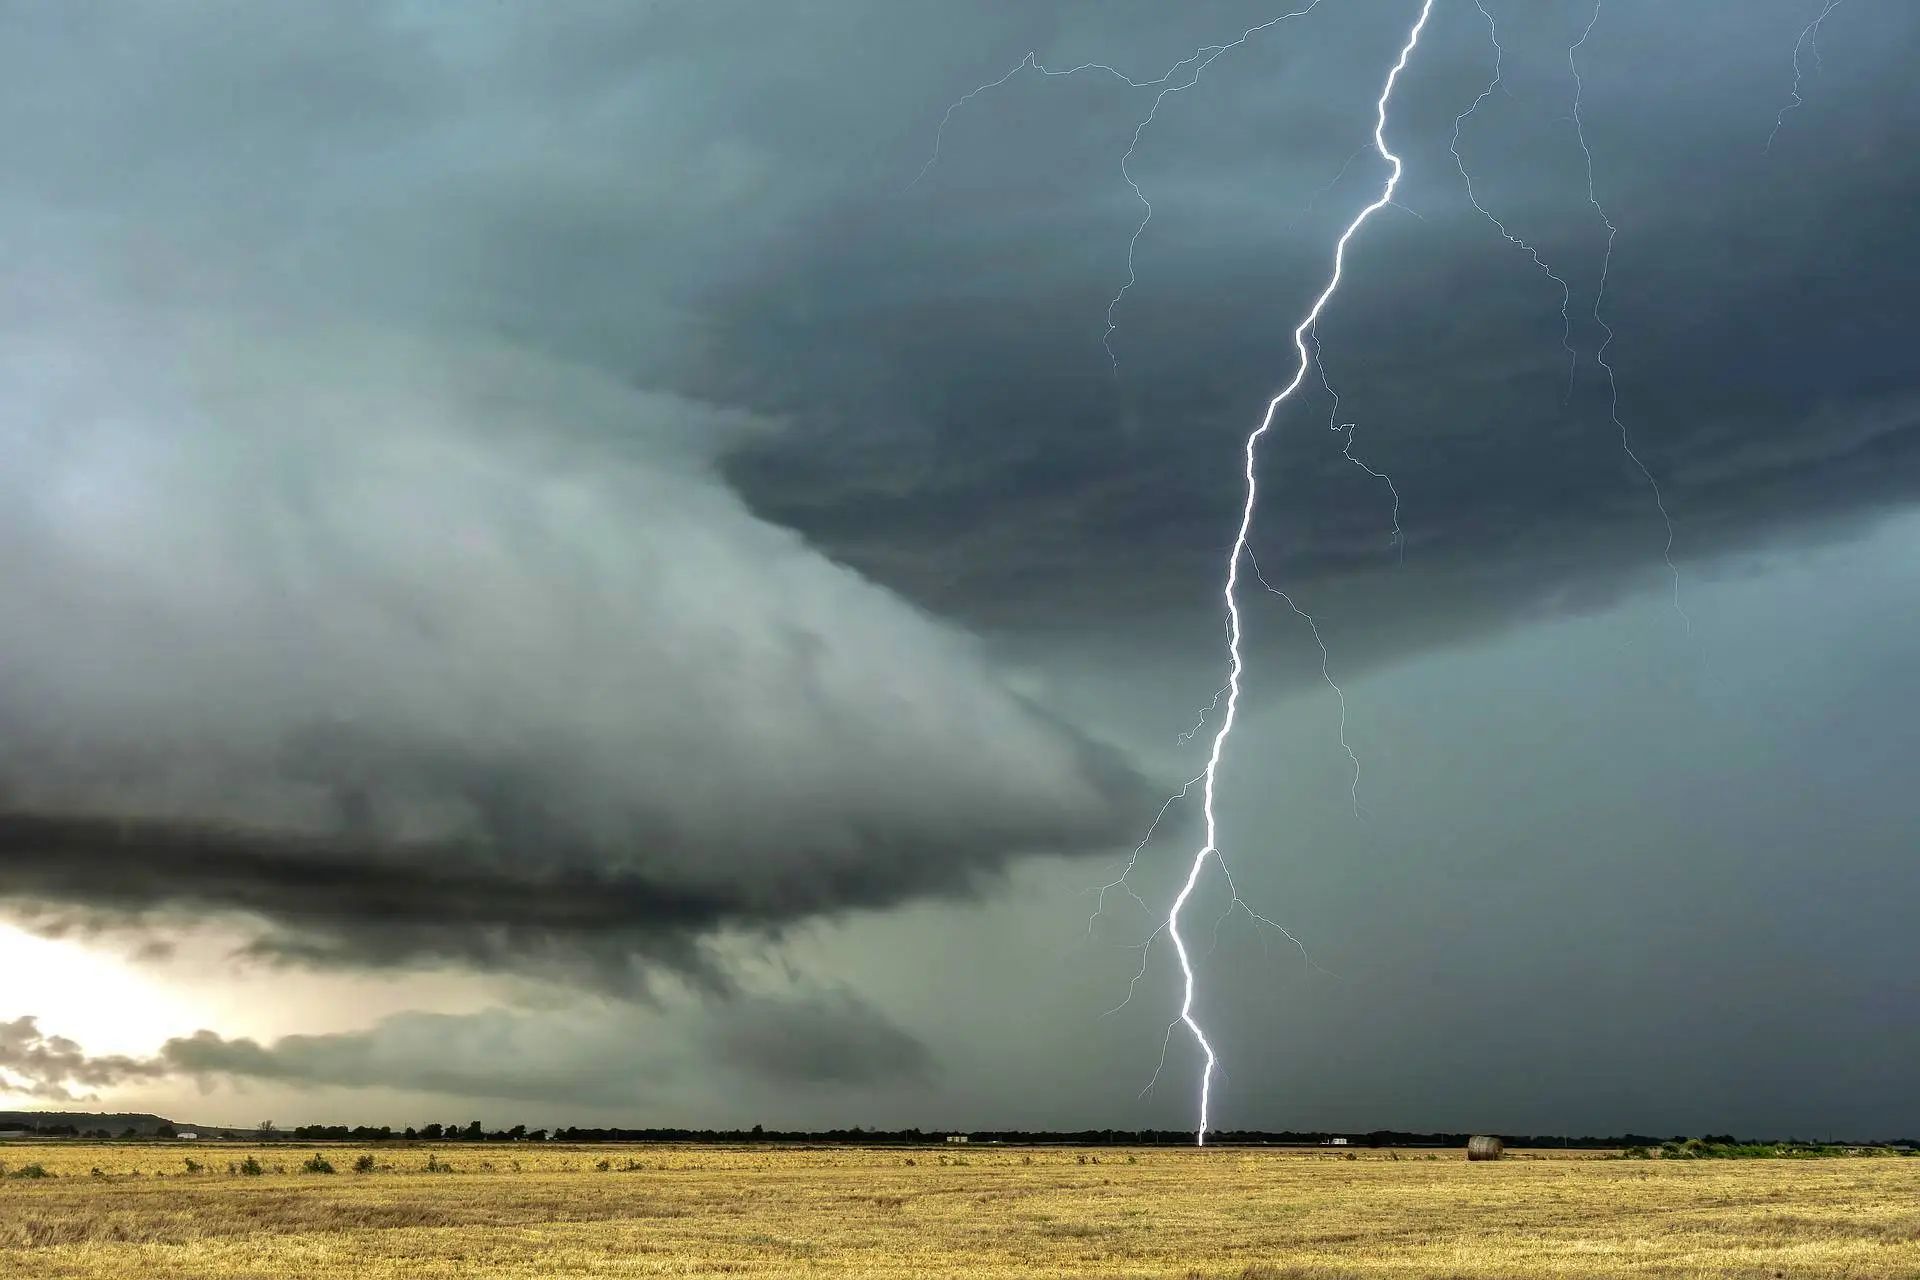 SPECTACULAR VIDEO with an Impressive Lightning, Tens of Kilometers Long